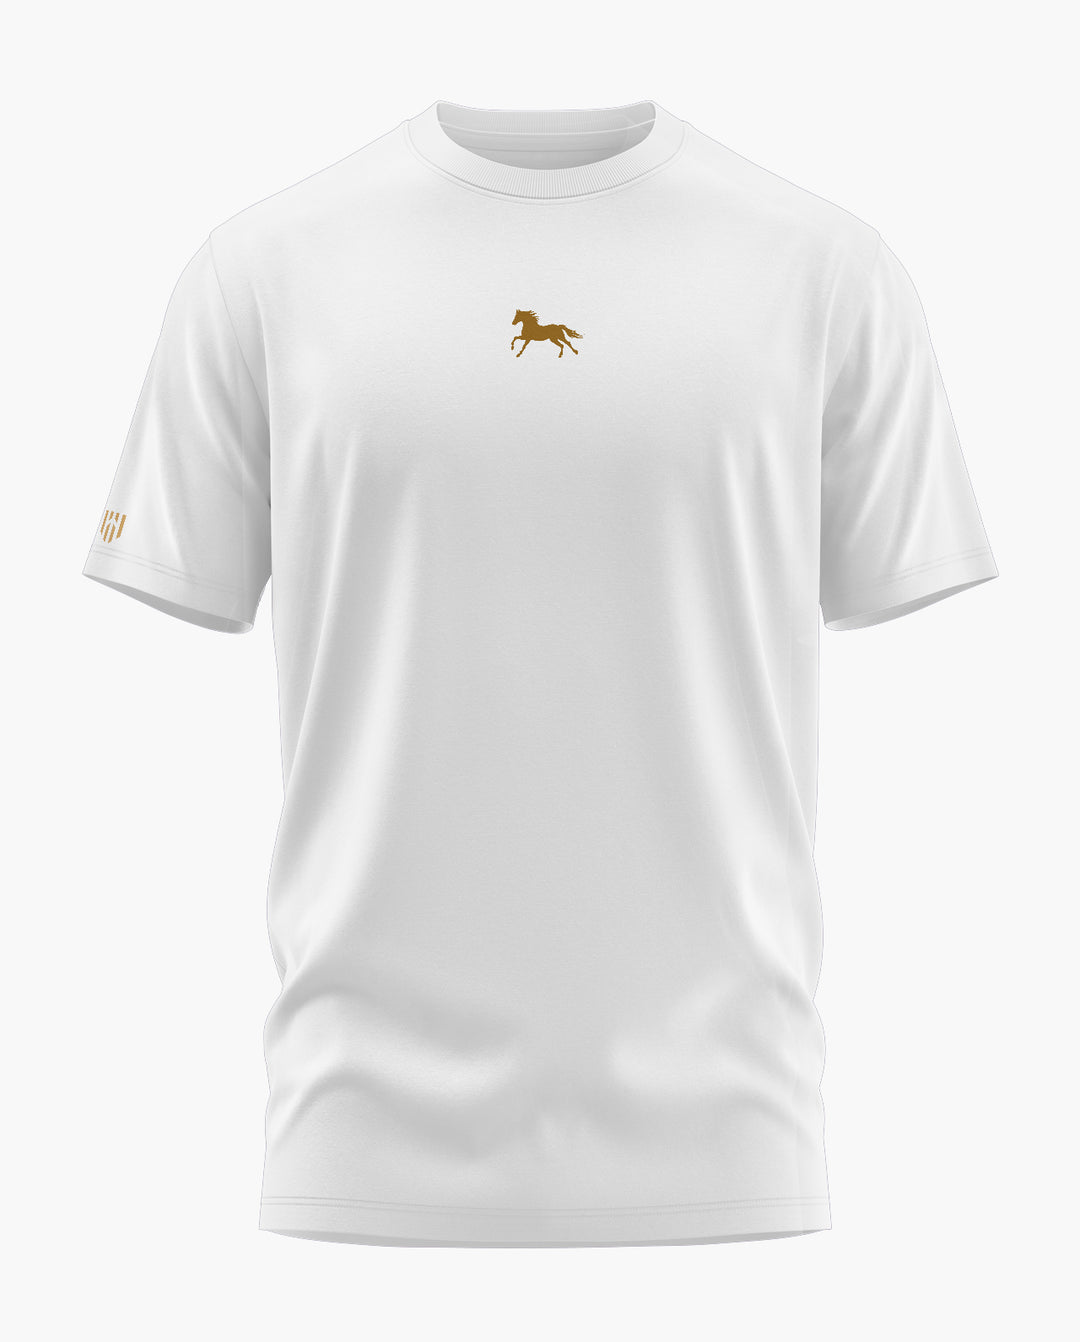 HOOVES AND HERITAGE T-Shirt